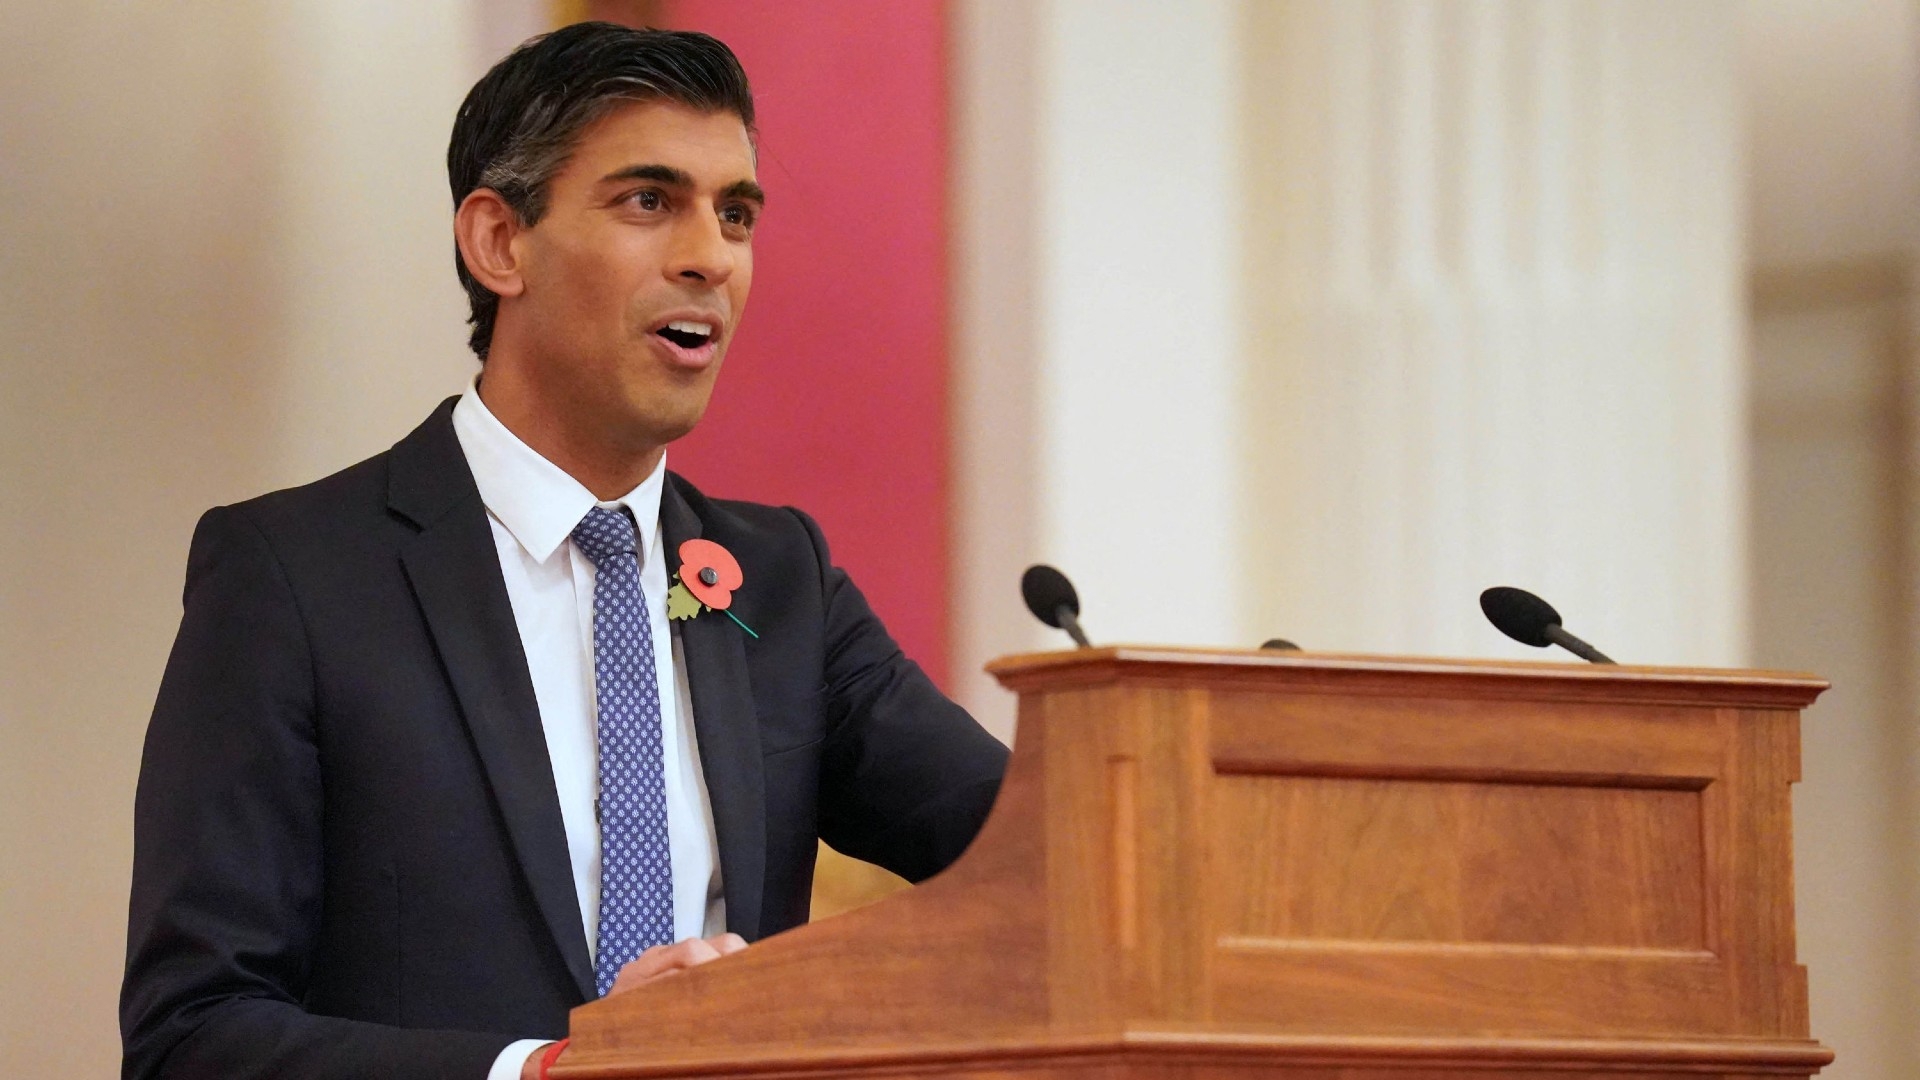 Britain's Prime Minister Rishi Sunak delivers a speech at a reception for world leaders, business figures and environmentalists at Buckingham Palace in London on 4 November 2022 (AFP)